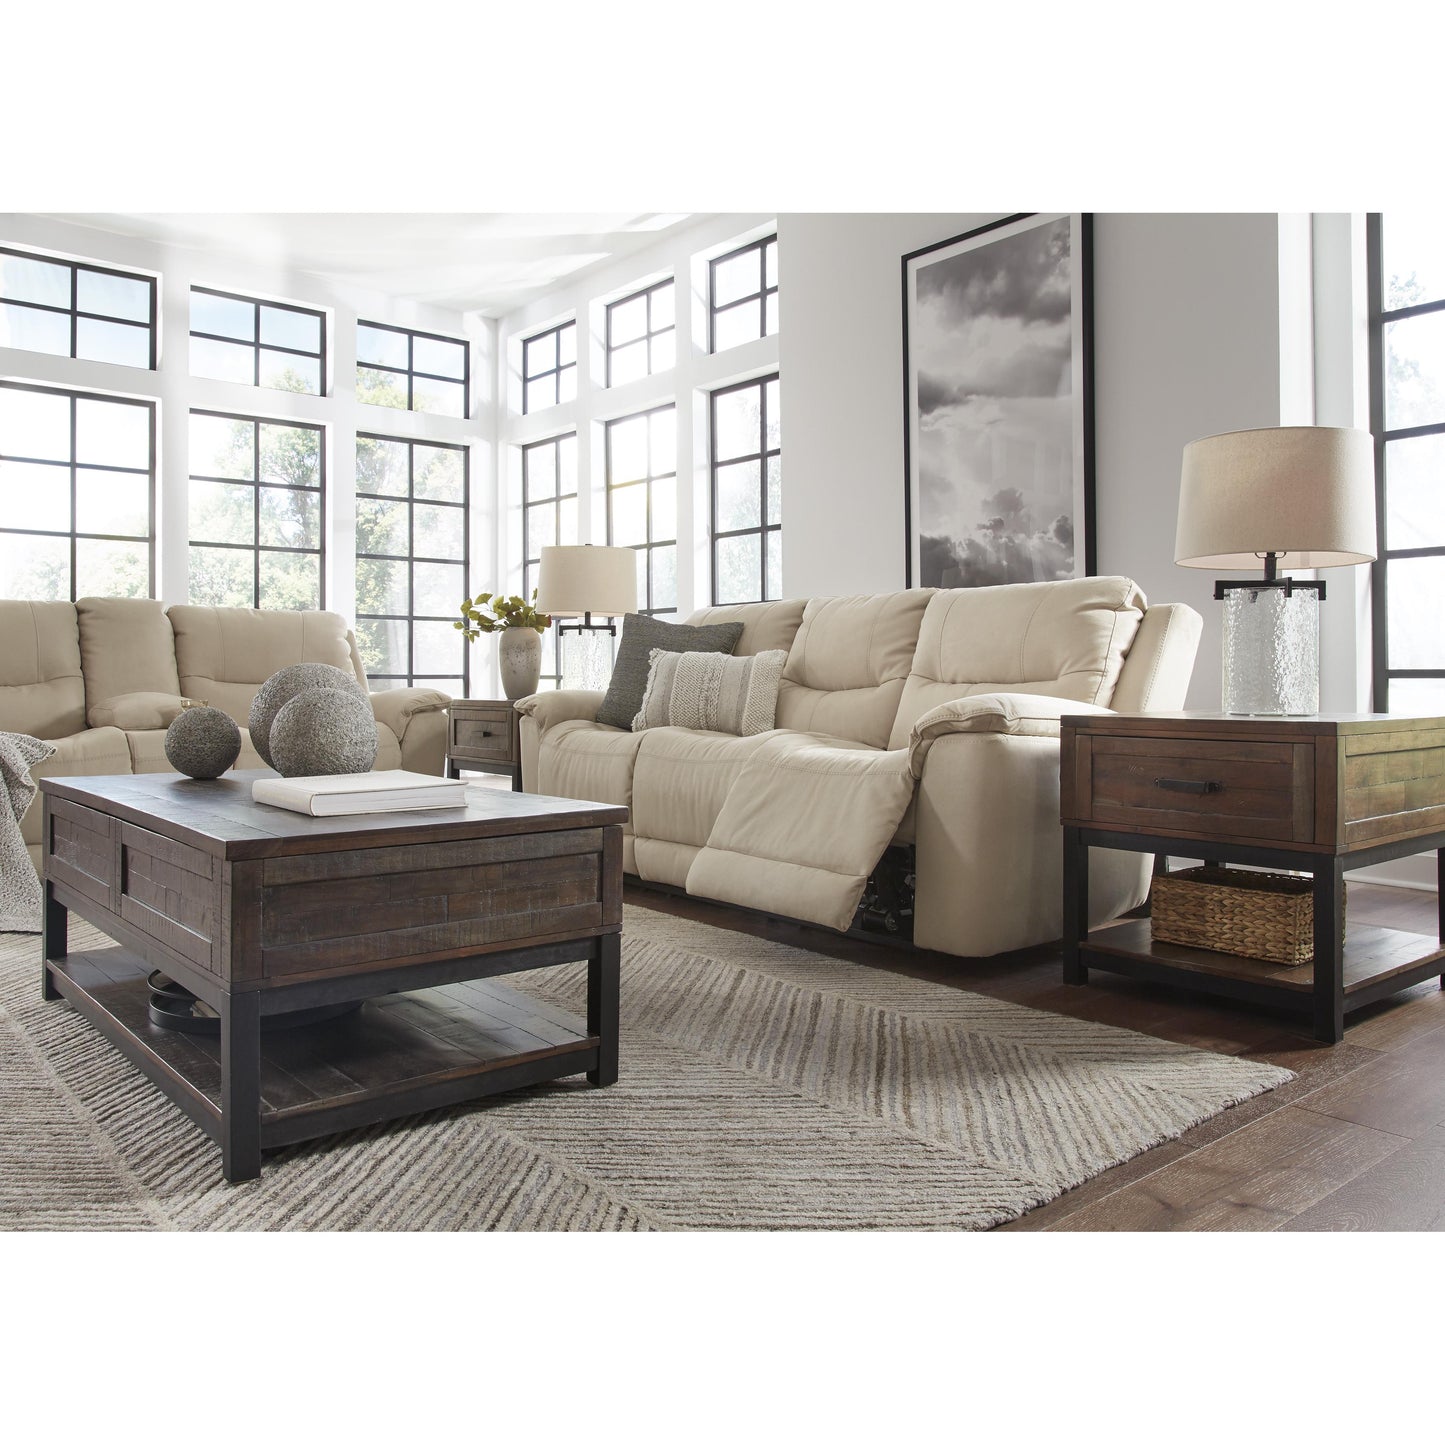 Signature Design by Ashley Next-Gen Gaucho Power Reclining Leather Look Sofa 6080715 IMAGE 9